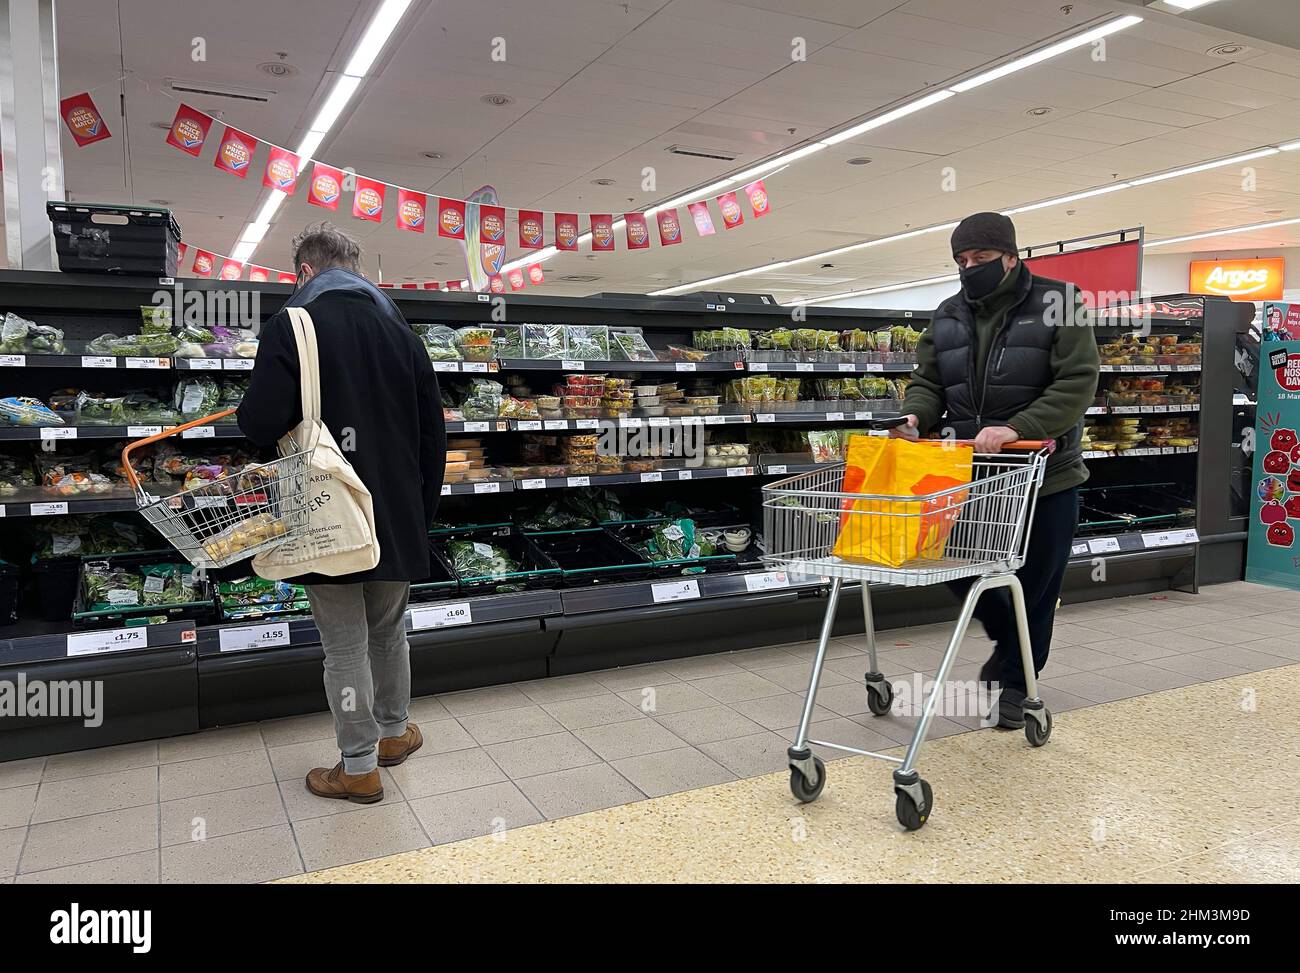 London, UK 6 Feb 2022 - Shoppers shopping in a supermarket in north London.  According to John Allan, Tesco chairman, food prices could rise by 5% this  spring, in addition to surges